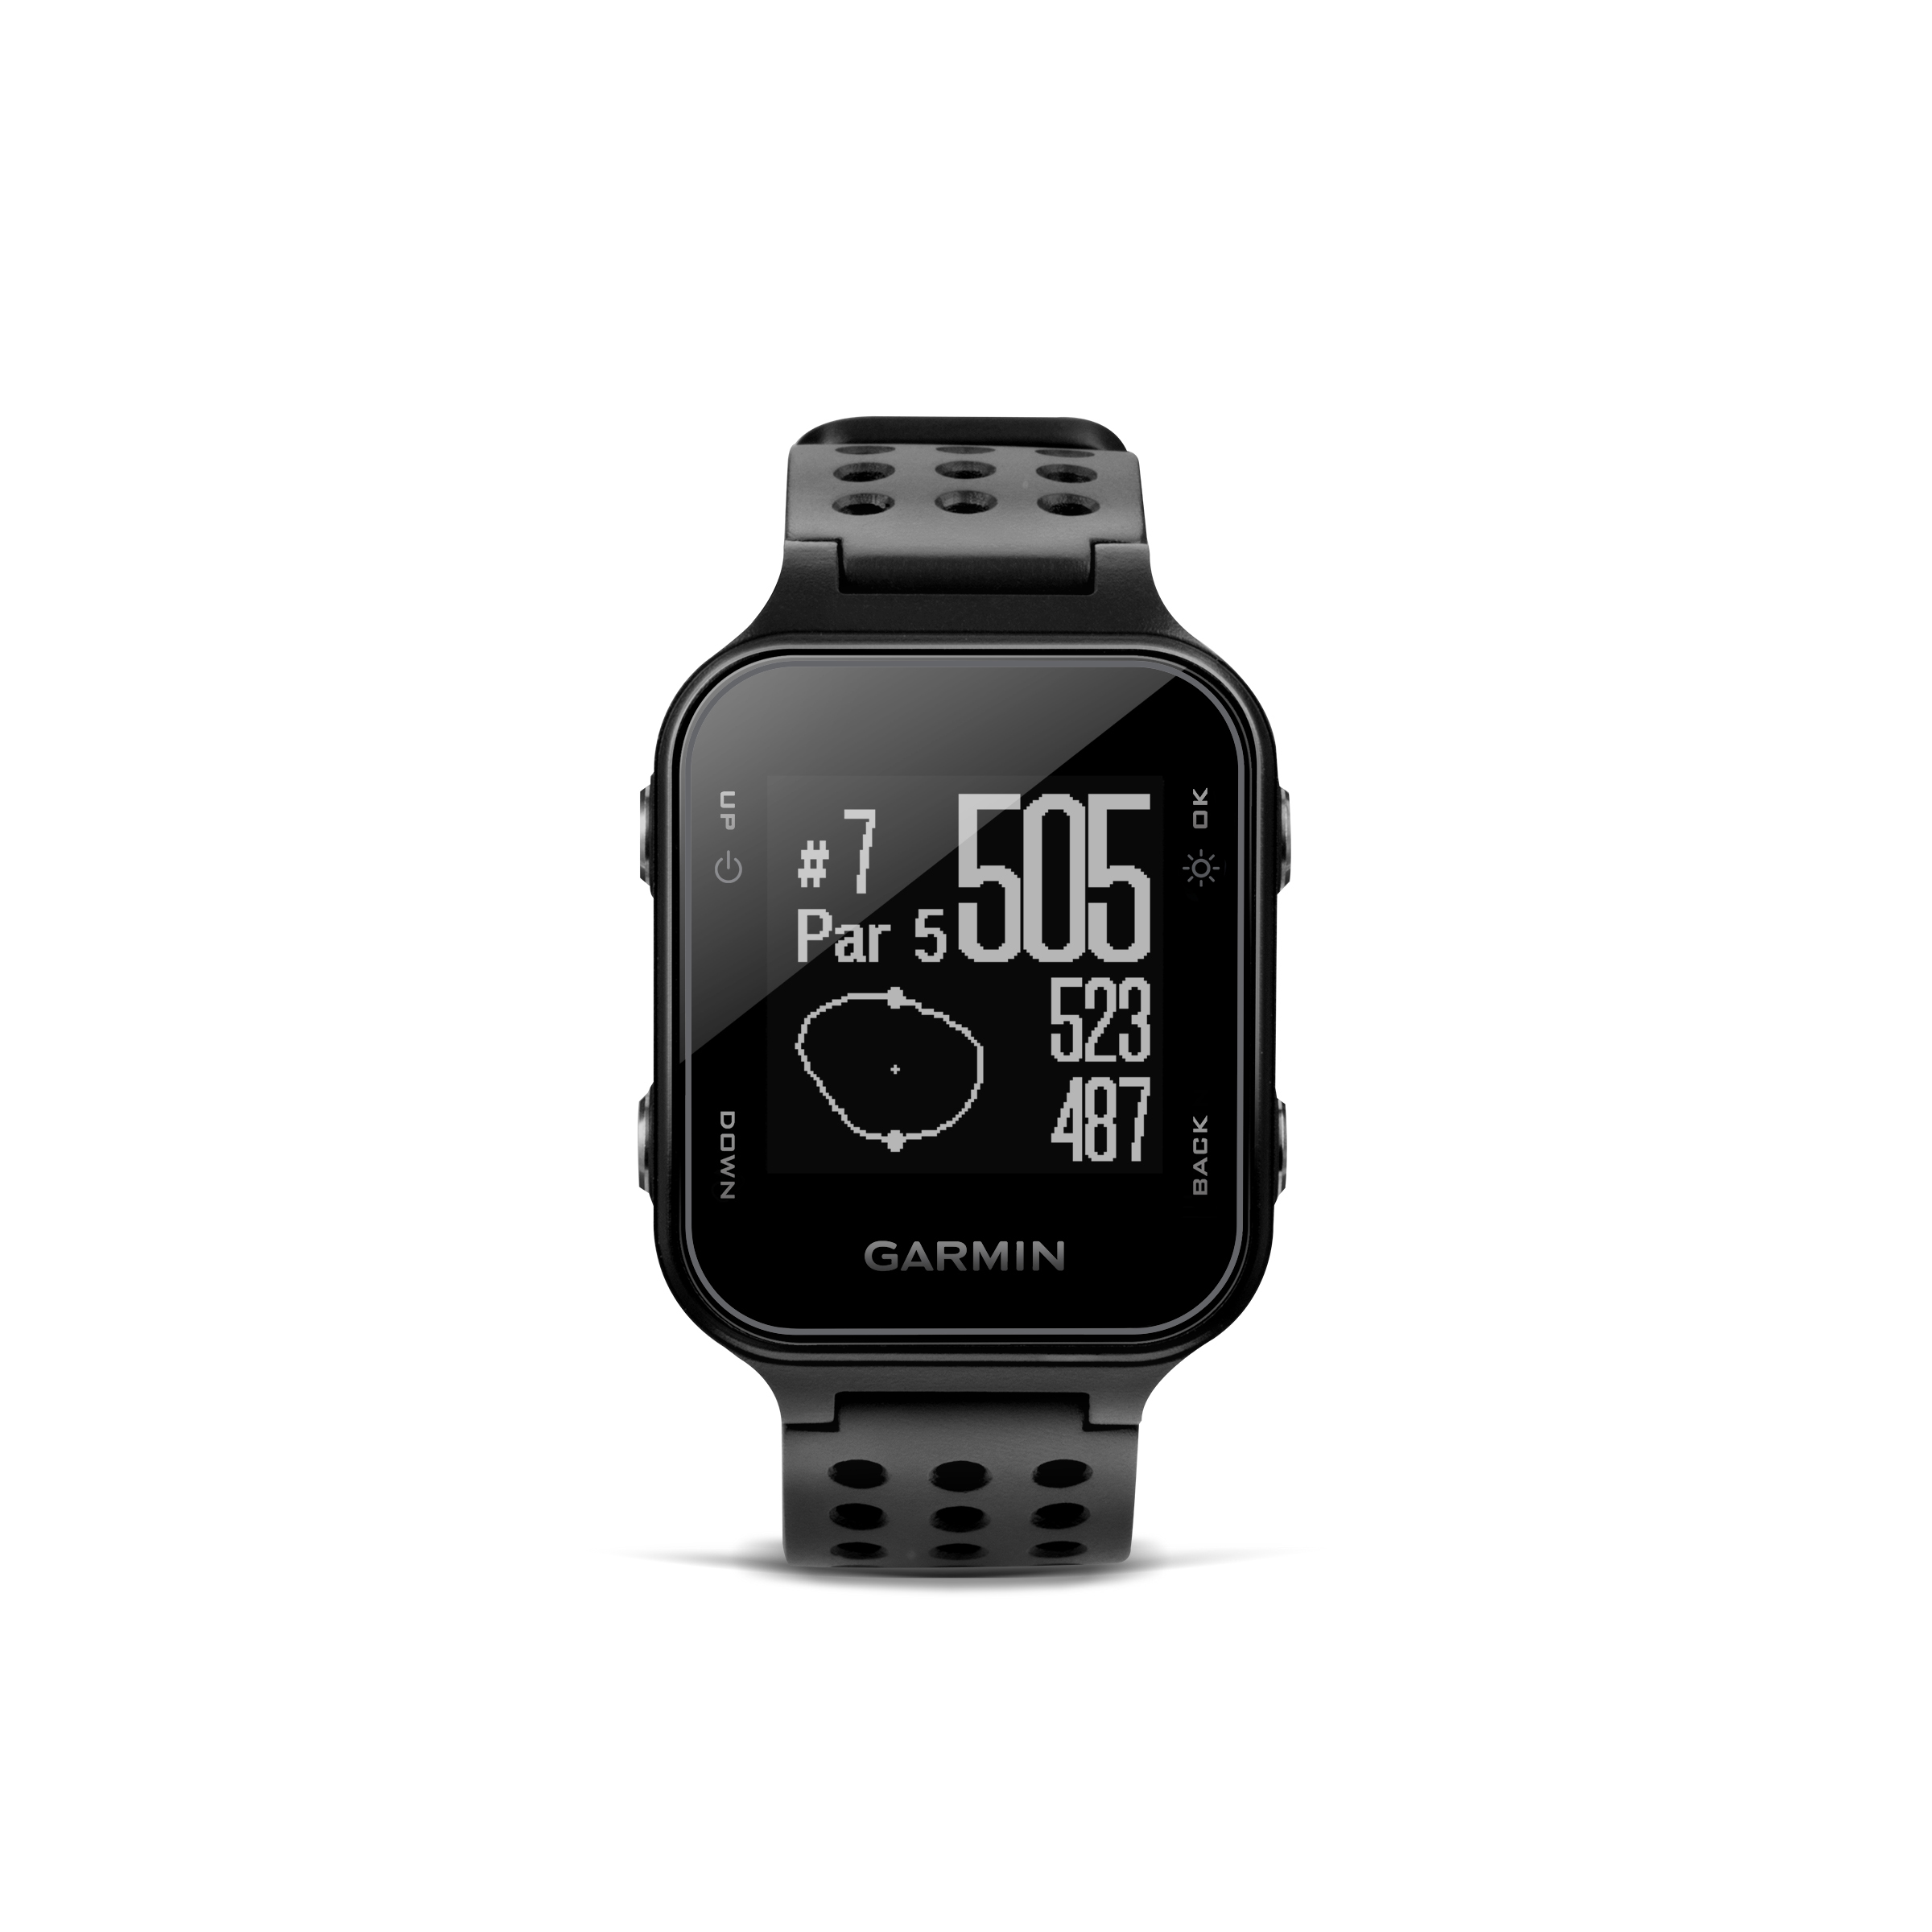 Introducing The Garmin Approach S20 The Golfing Partner That Doubles As An Everyday Watch Business Wire